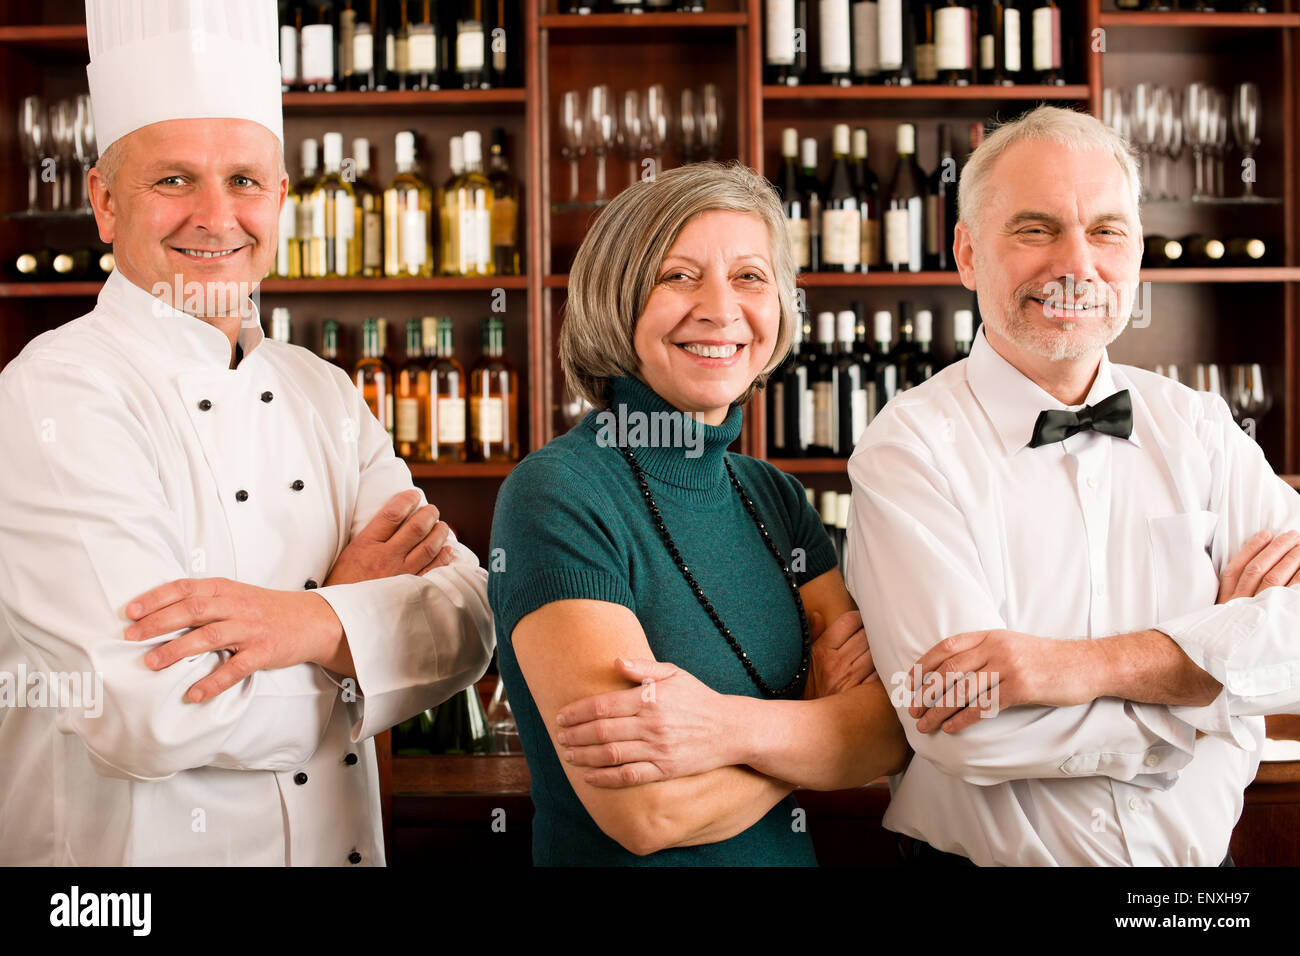 Restaurant manager posing with professional staff Stock Photo